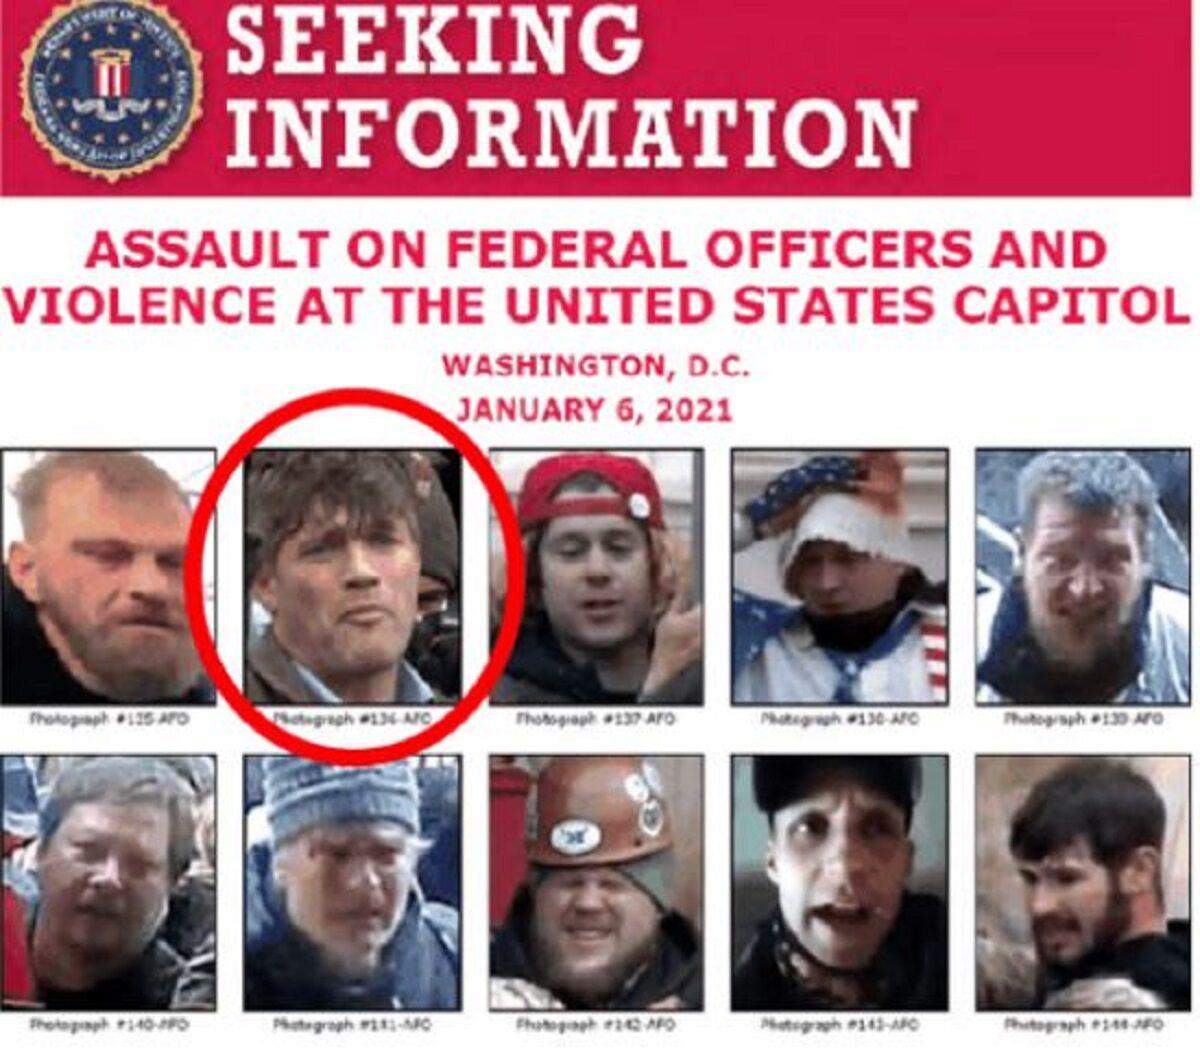 Federico Klein, top second from left, is seen in a handout by the FBI seeking information on the breach of the U.S. Capitol in Washington. (FBI)